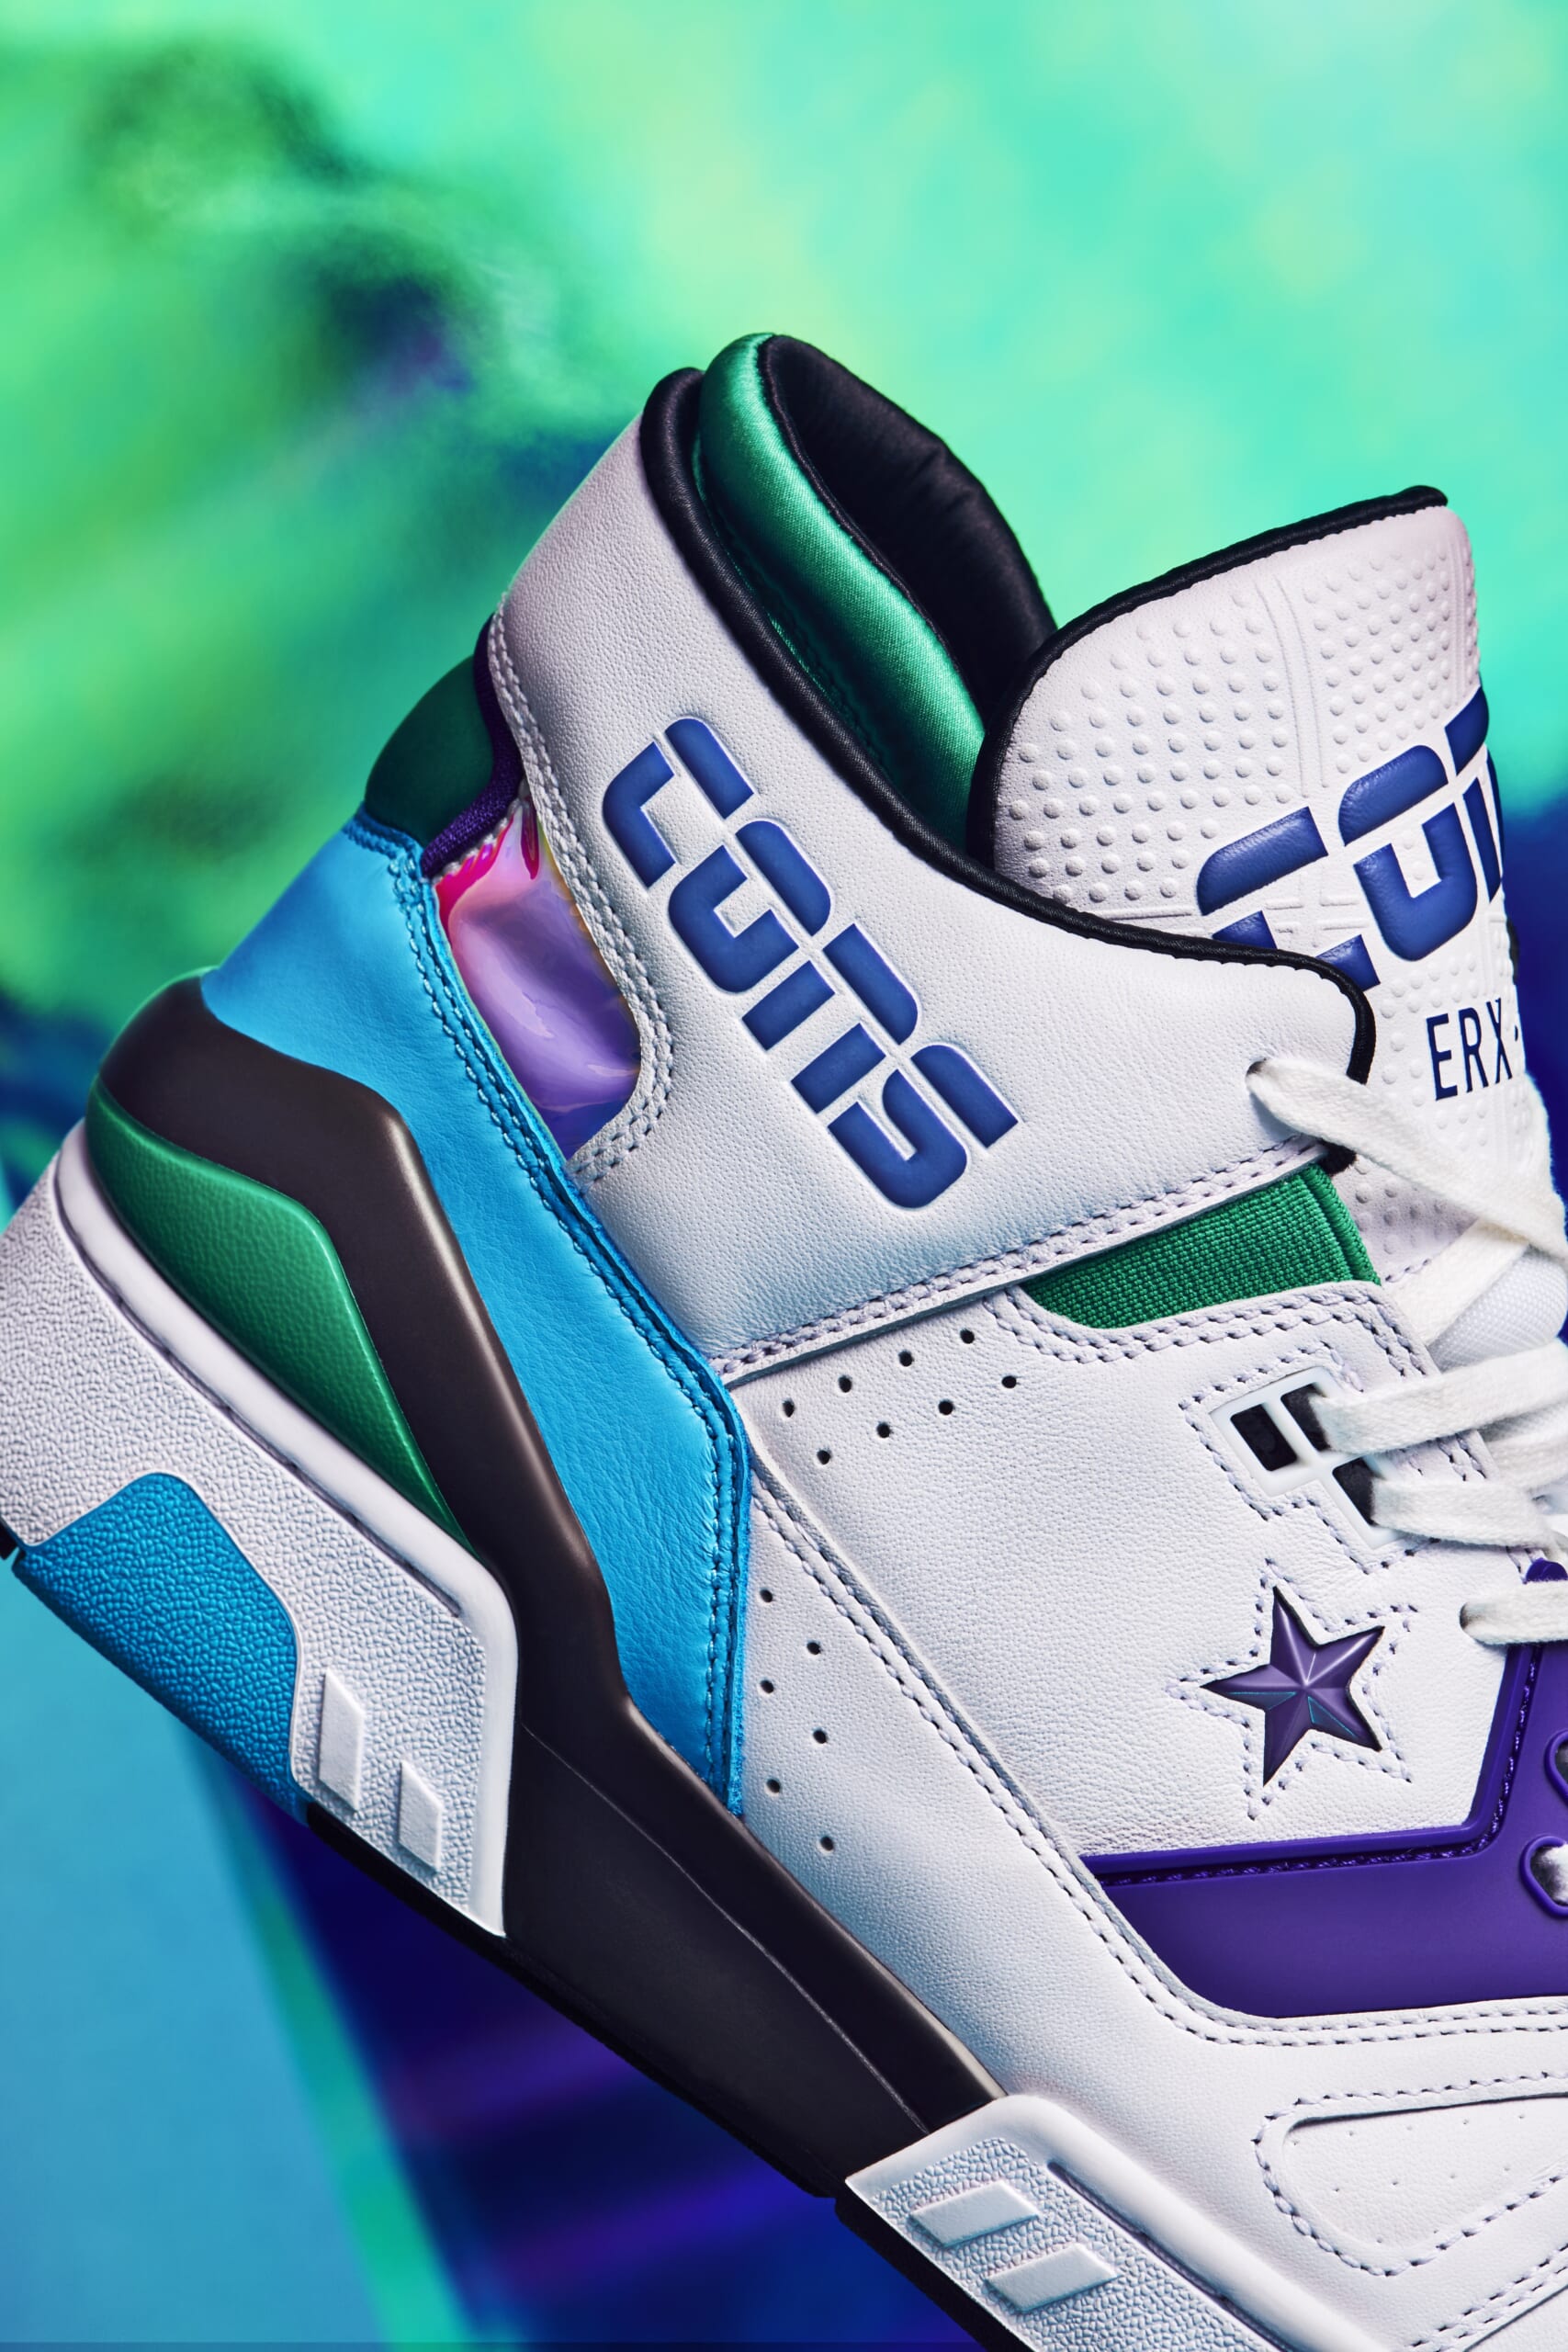 Converse Unveils Retro Sneakers For All-Star Weekend -